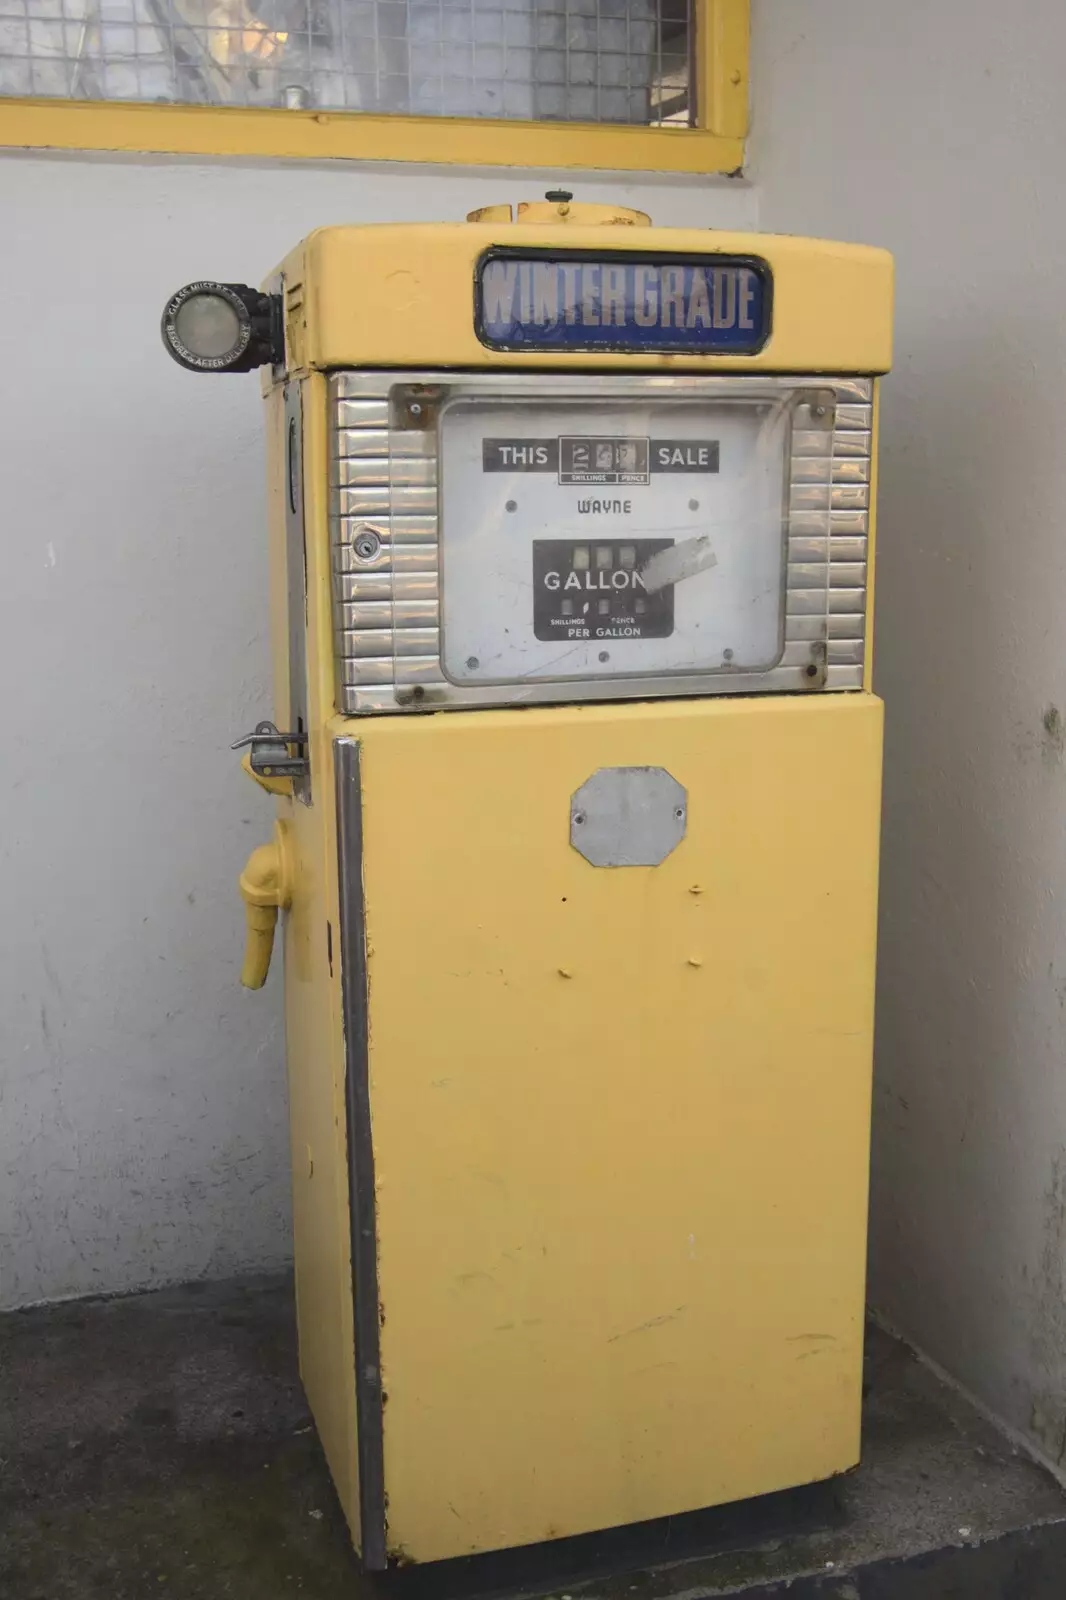 A nice 1950s yellow petrol pump, from A Day in Greystones, County Dublin, Ireland - 28th February 2010